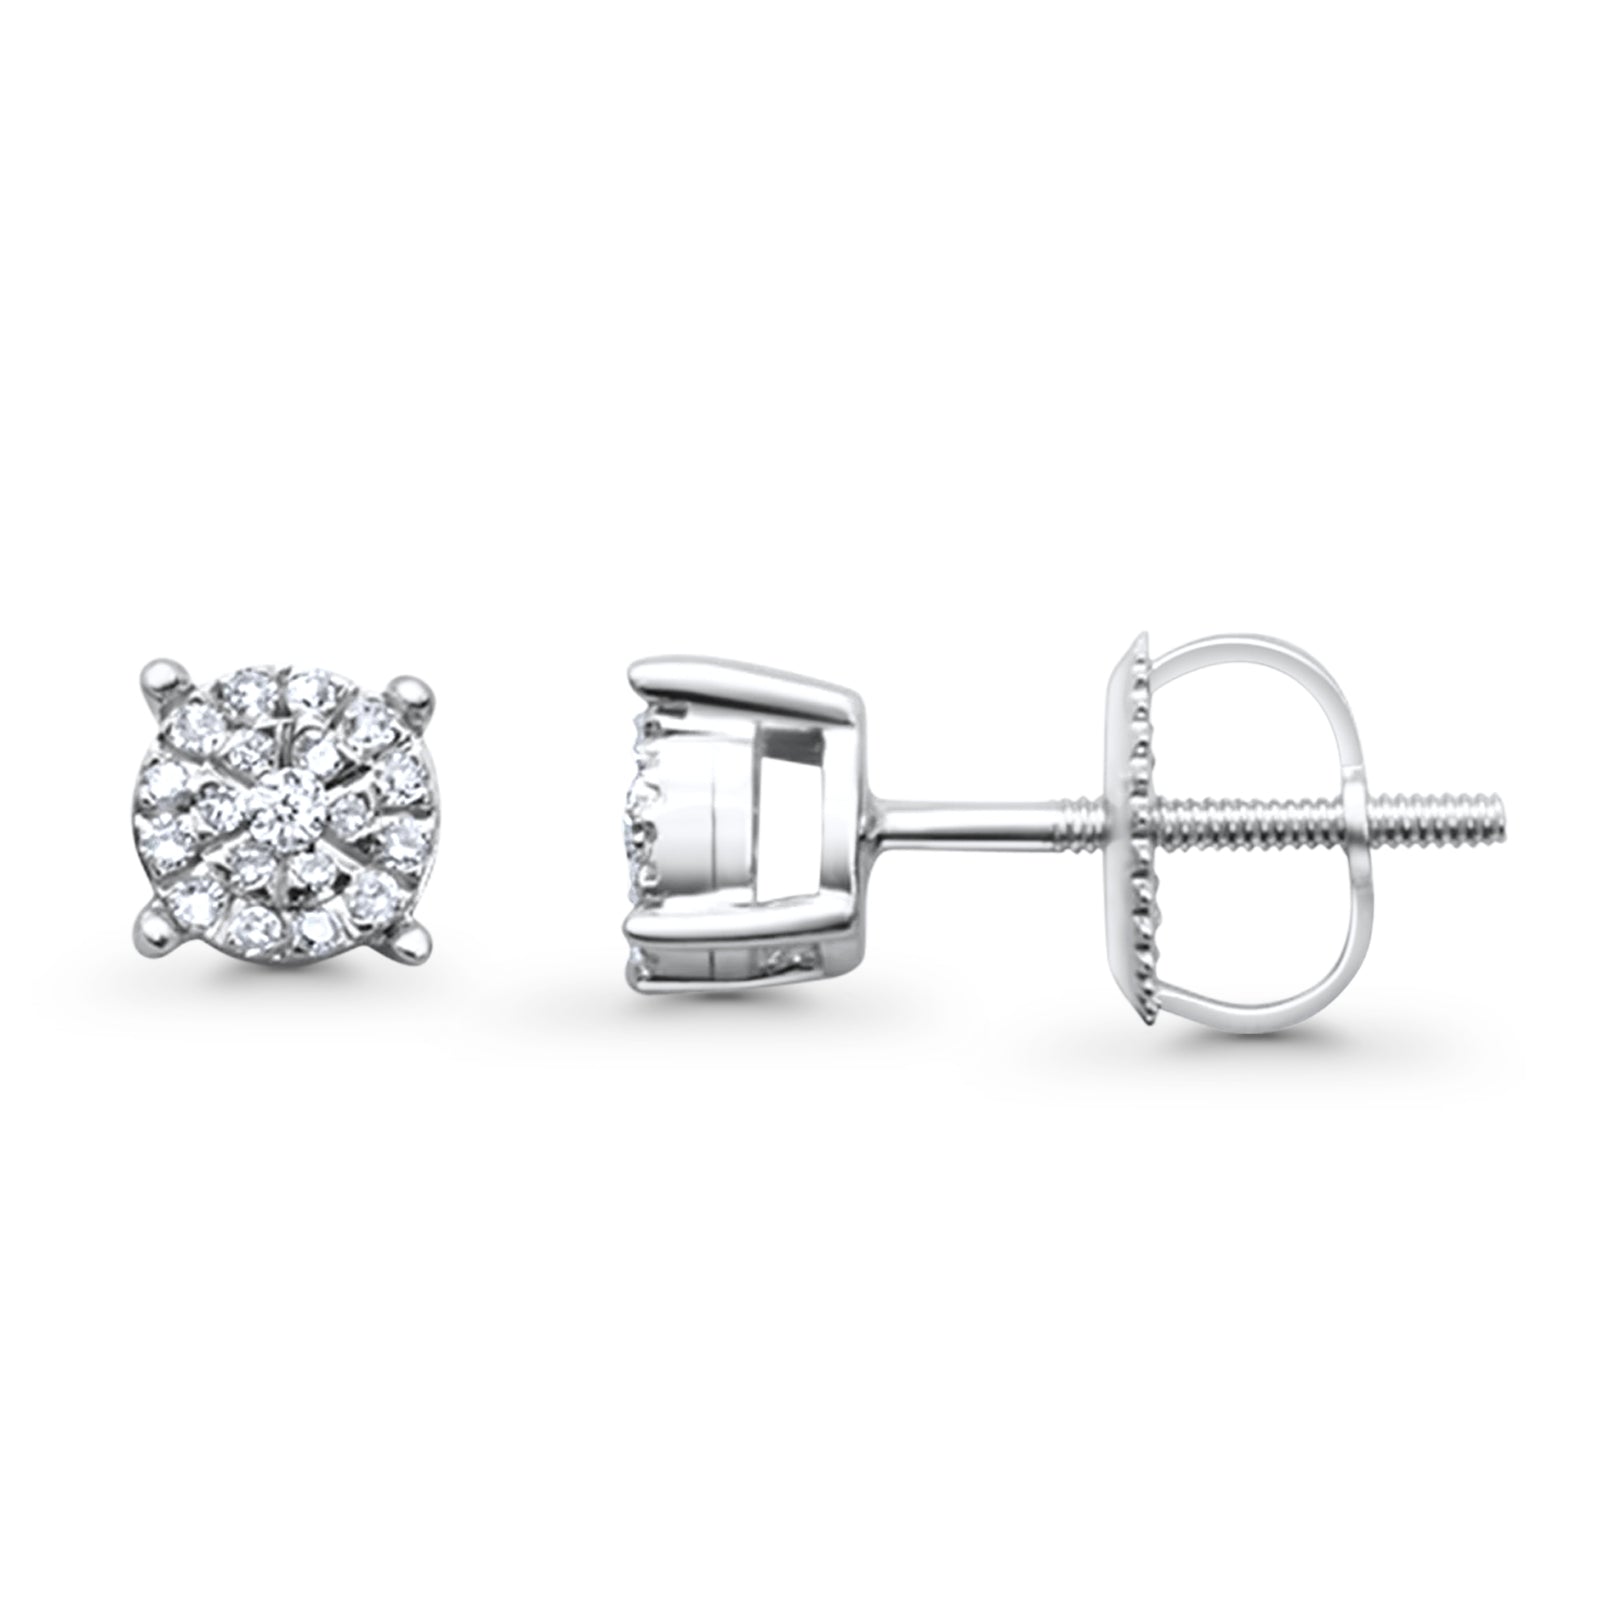 Solid 10K Gold 5mm Round Diamond Stud Earrings With Pave Setting